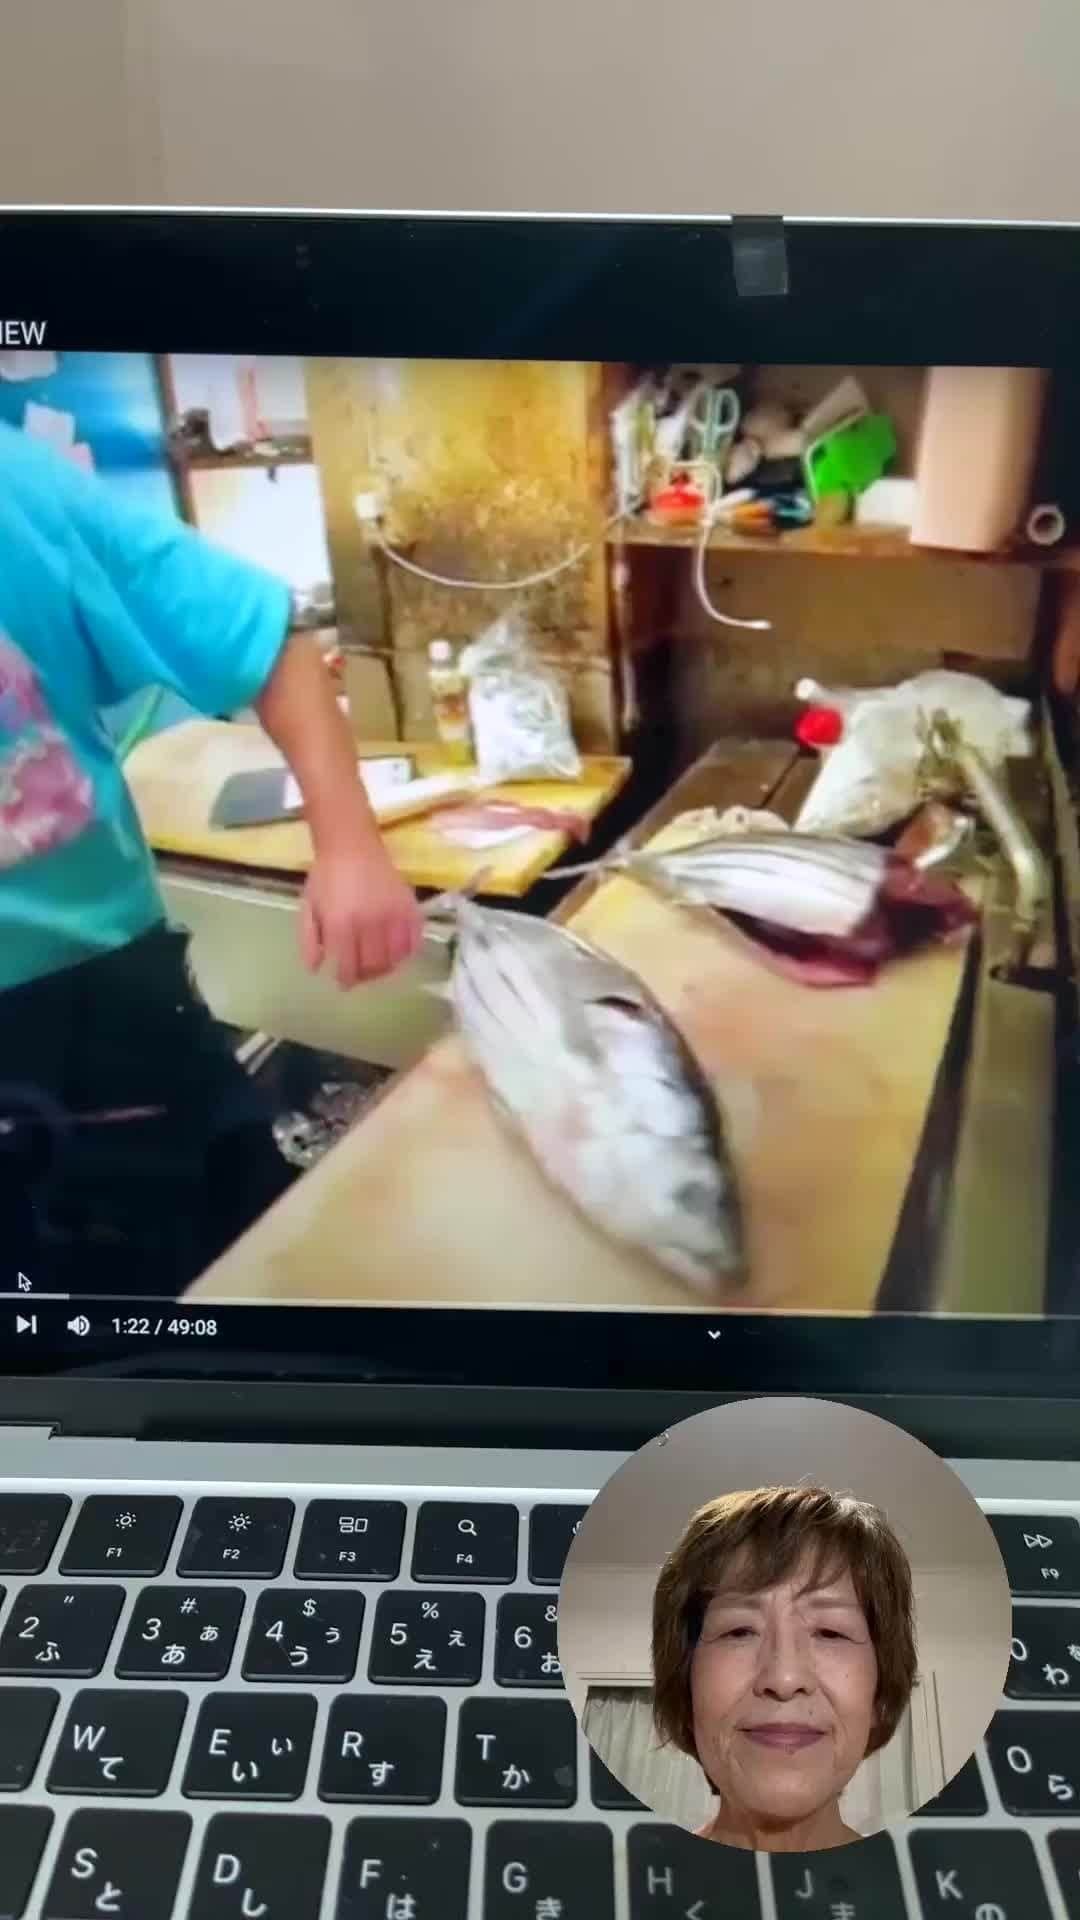 Cooking with Dogのインスタグラム：「I'm currently trying my hand at narration. 🎙️👩‍🍳 This is a video from a fish store we plan to publish this weekend. 🐟 They are very skilled at preparing bonito, aren't they? 😍 こちらは公開を予定しているお魚屋さんのビデオです😋今ナレーションに挑戦しています。カツオをさばくの手際がいいですね😳」